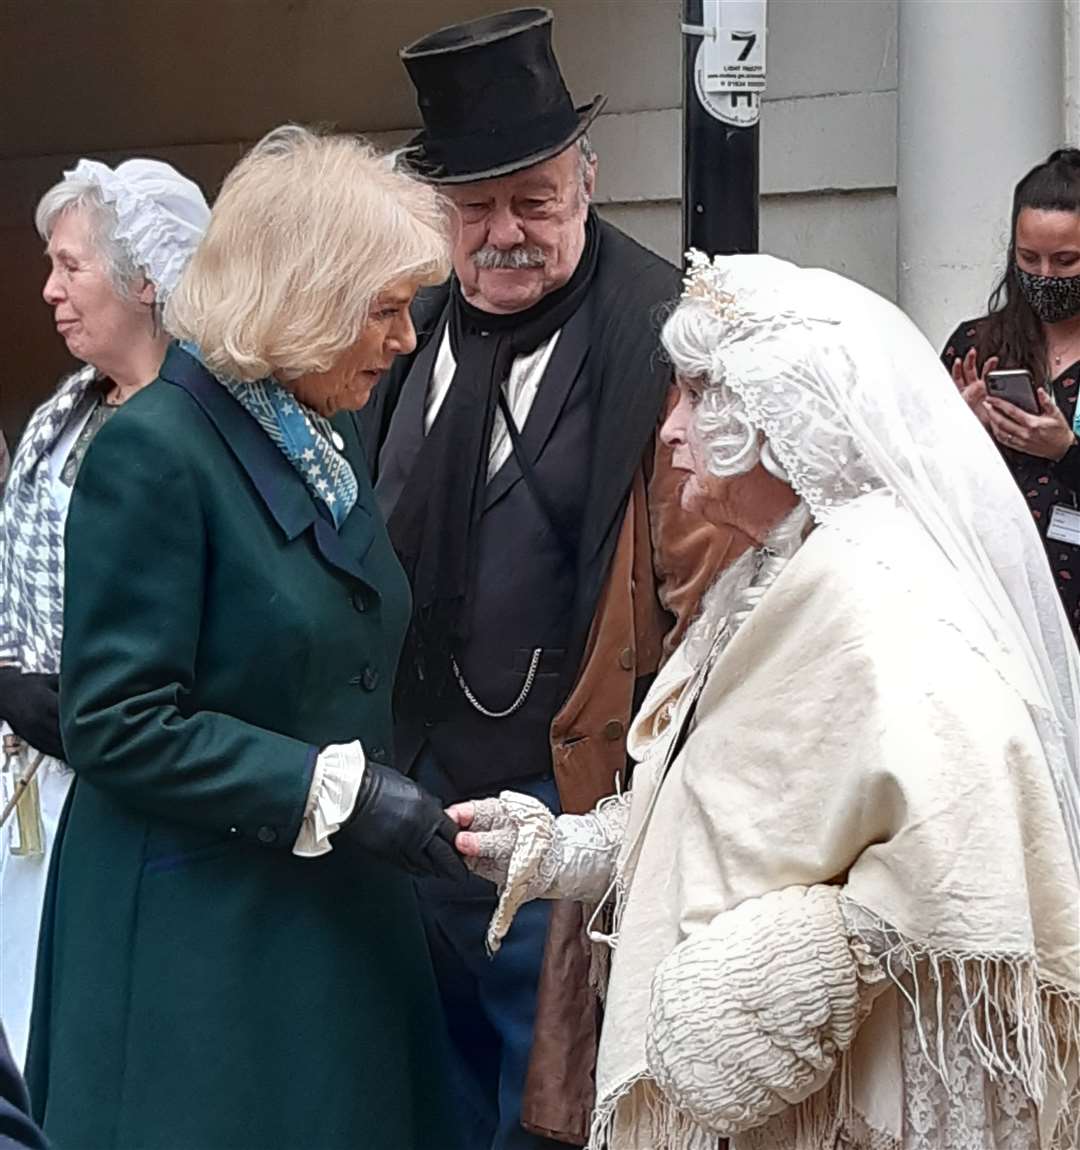 The Duchess of Cornwall speaking to one of the Victorian costumed characters from The Rochester and Chatham Dickens Fellowship.